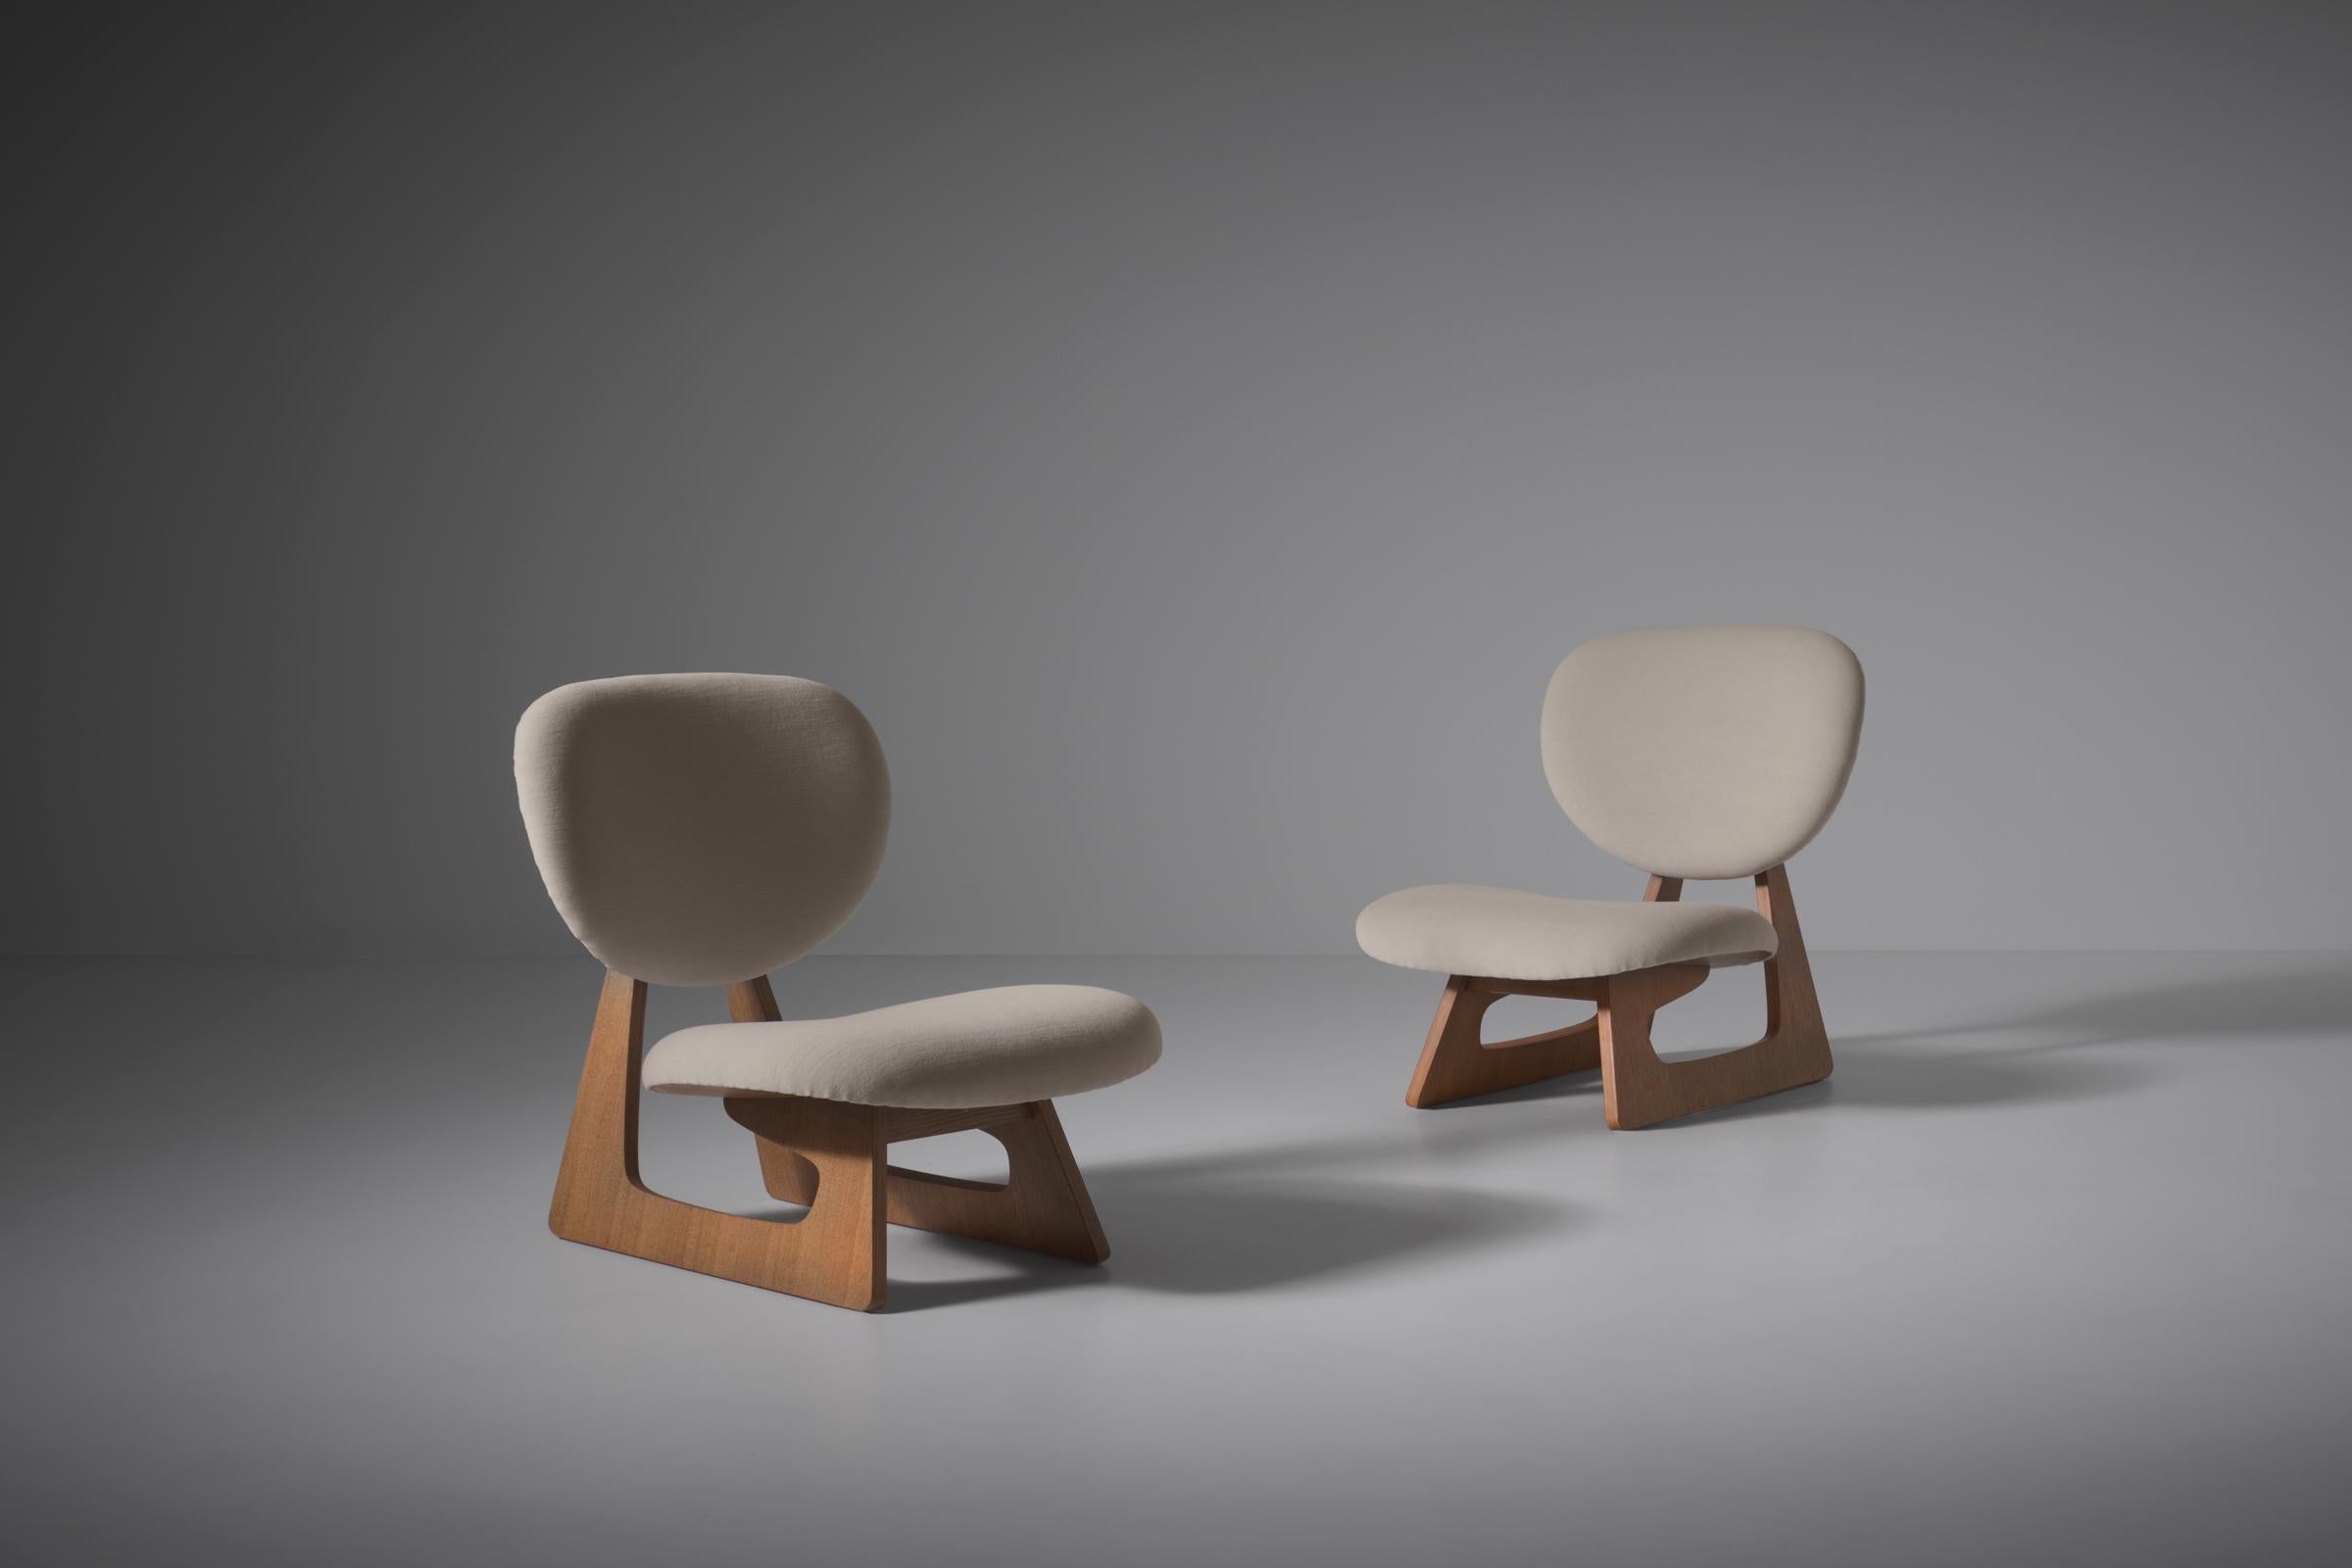 Pair of ‘Model 5016’ lounge chairs by Junzo Sakakura and Daisaku Cho for Tendo Mokko, Japan 1957 (1960s production). Sturdy Oak plywood frames and elegant curved seat and backs. The seat has been reupholstered in a thick compact woolen velvet. Junzo